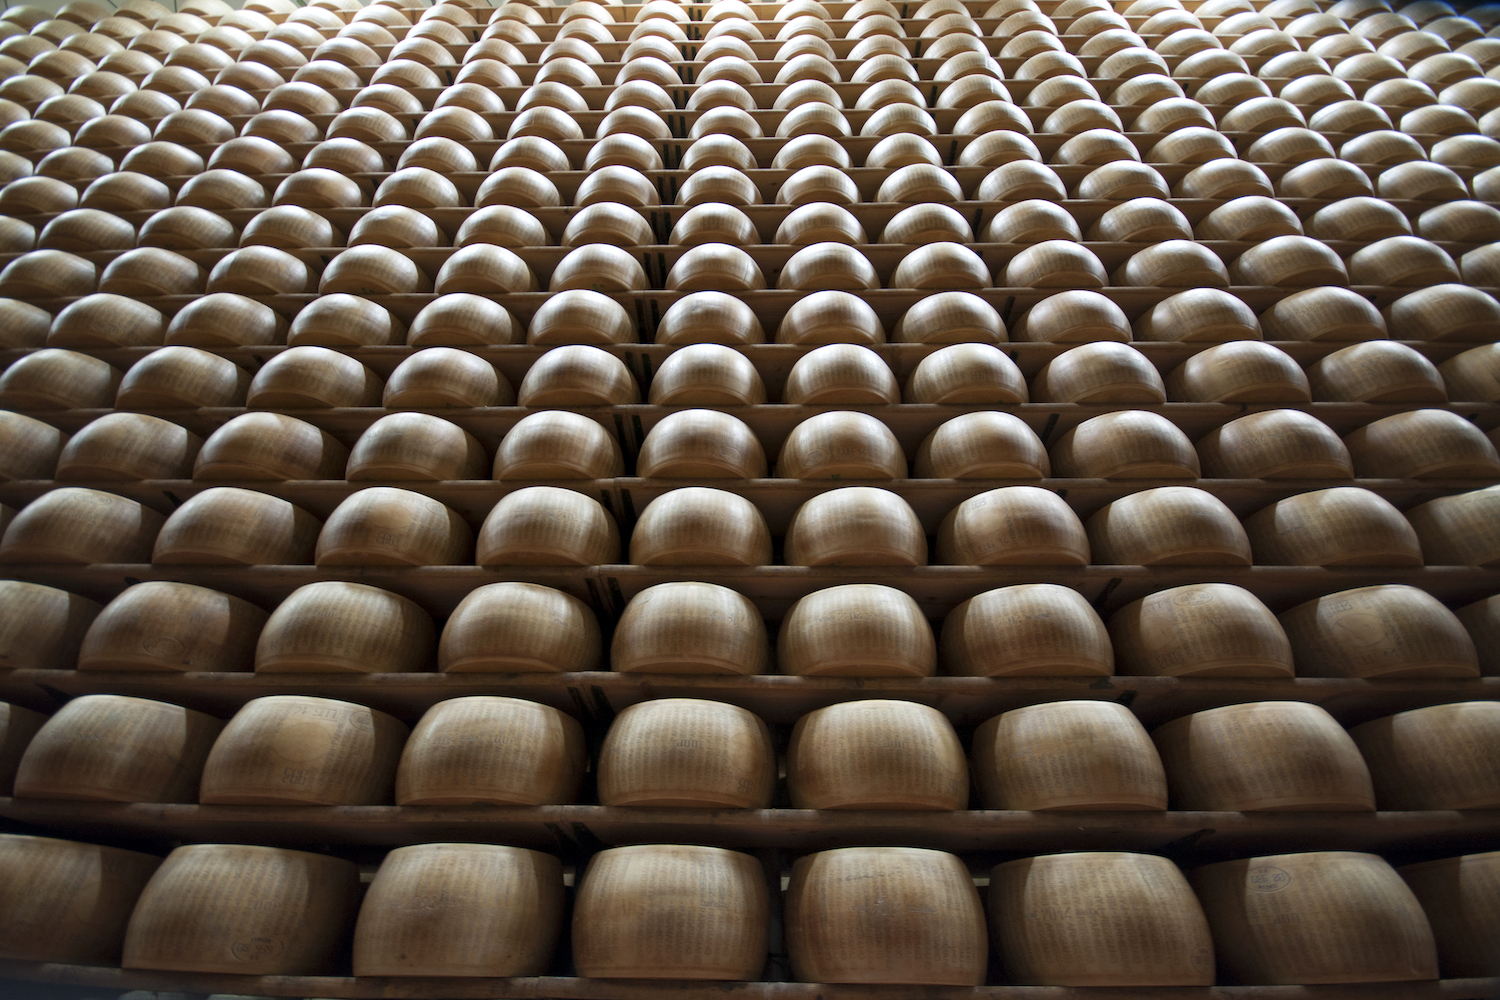 a wall of hundreds of wheels of parmigiano reggiano cheese